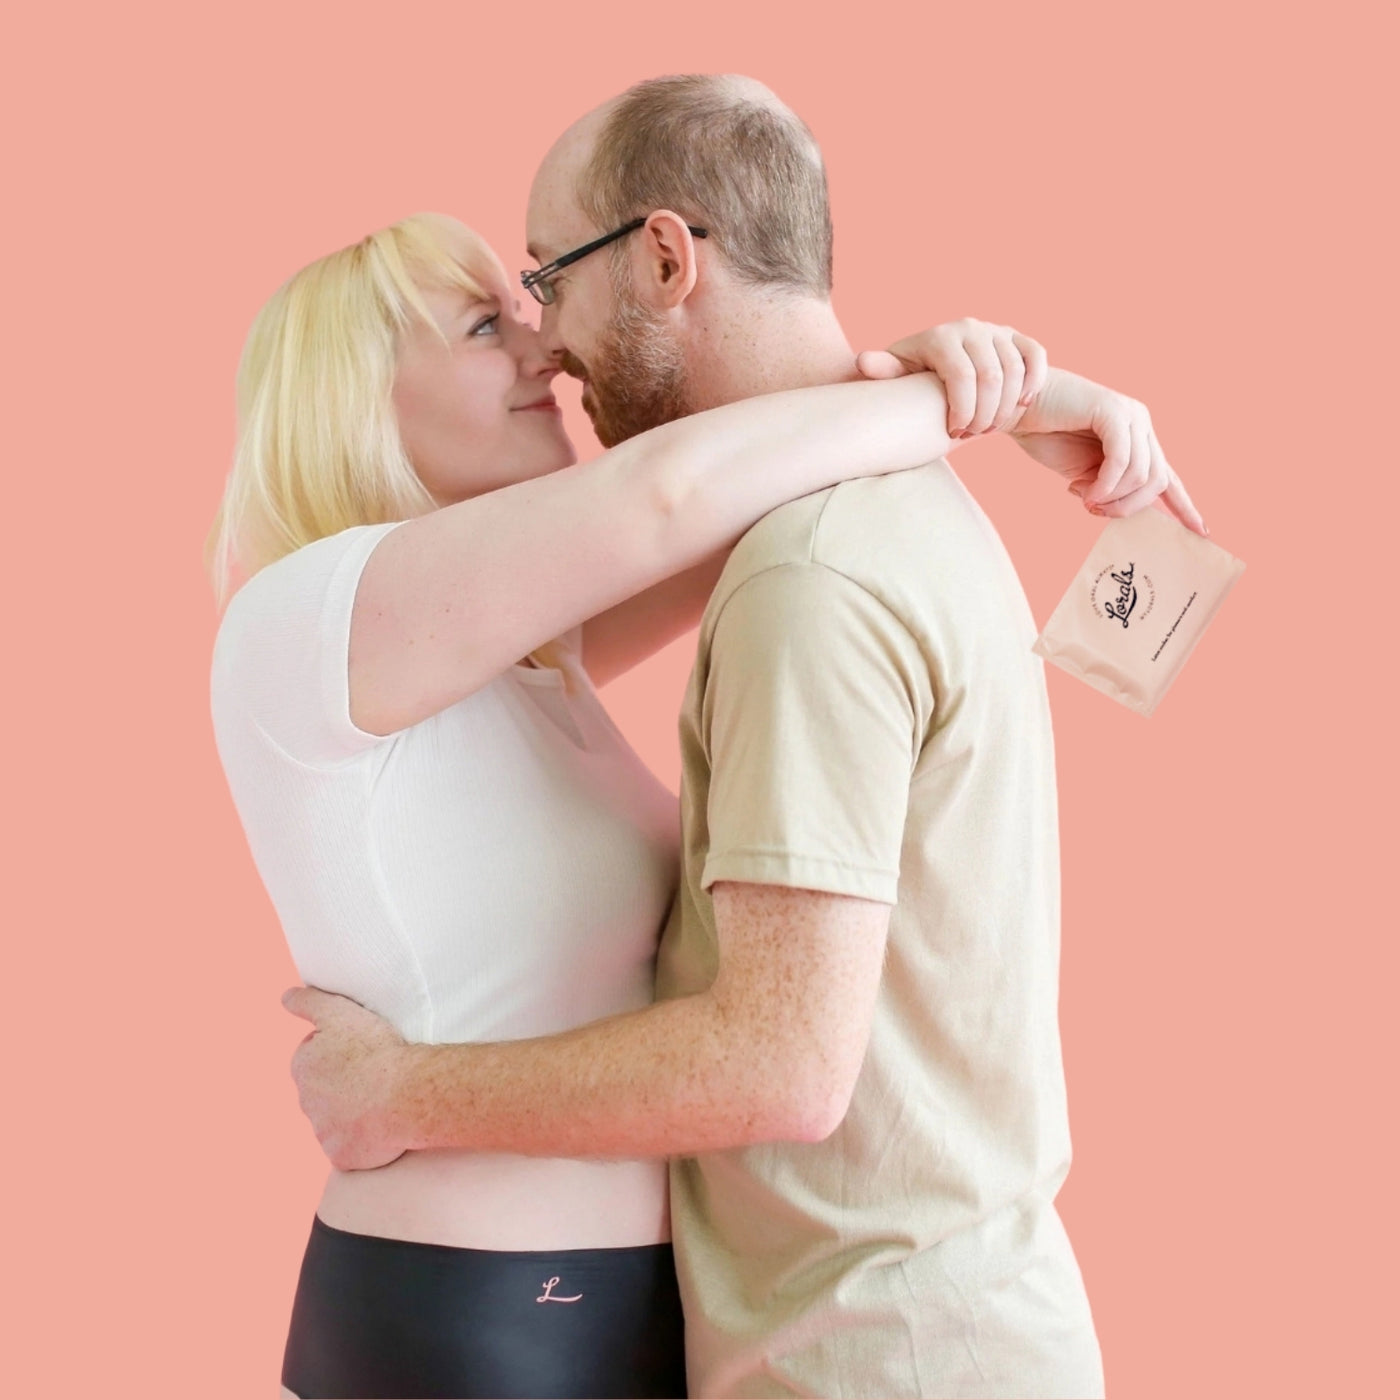 A man and a woman kiss and hold Lorals Undies for Comfort during oral